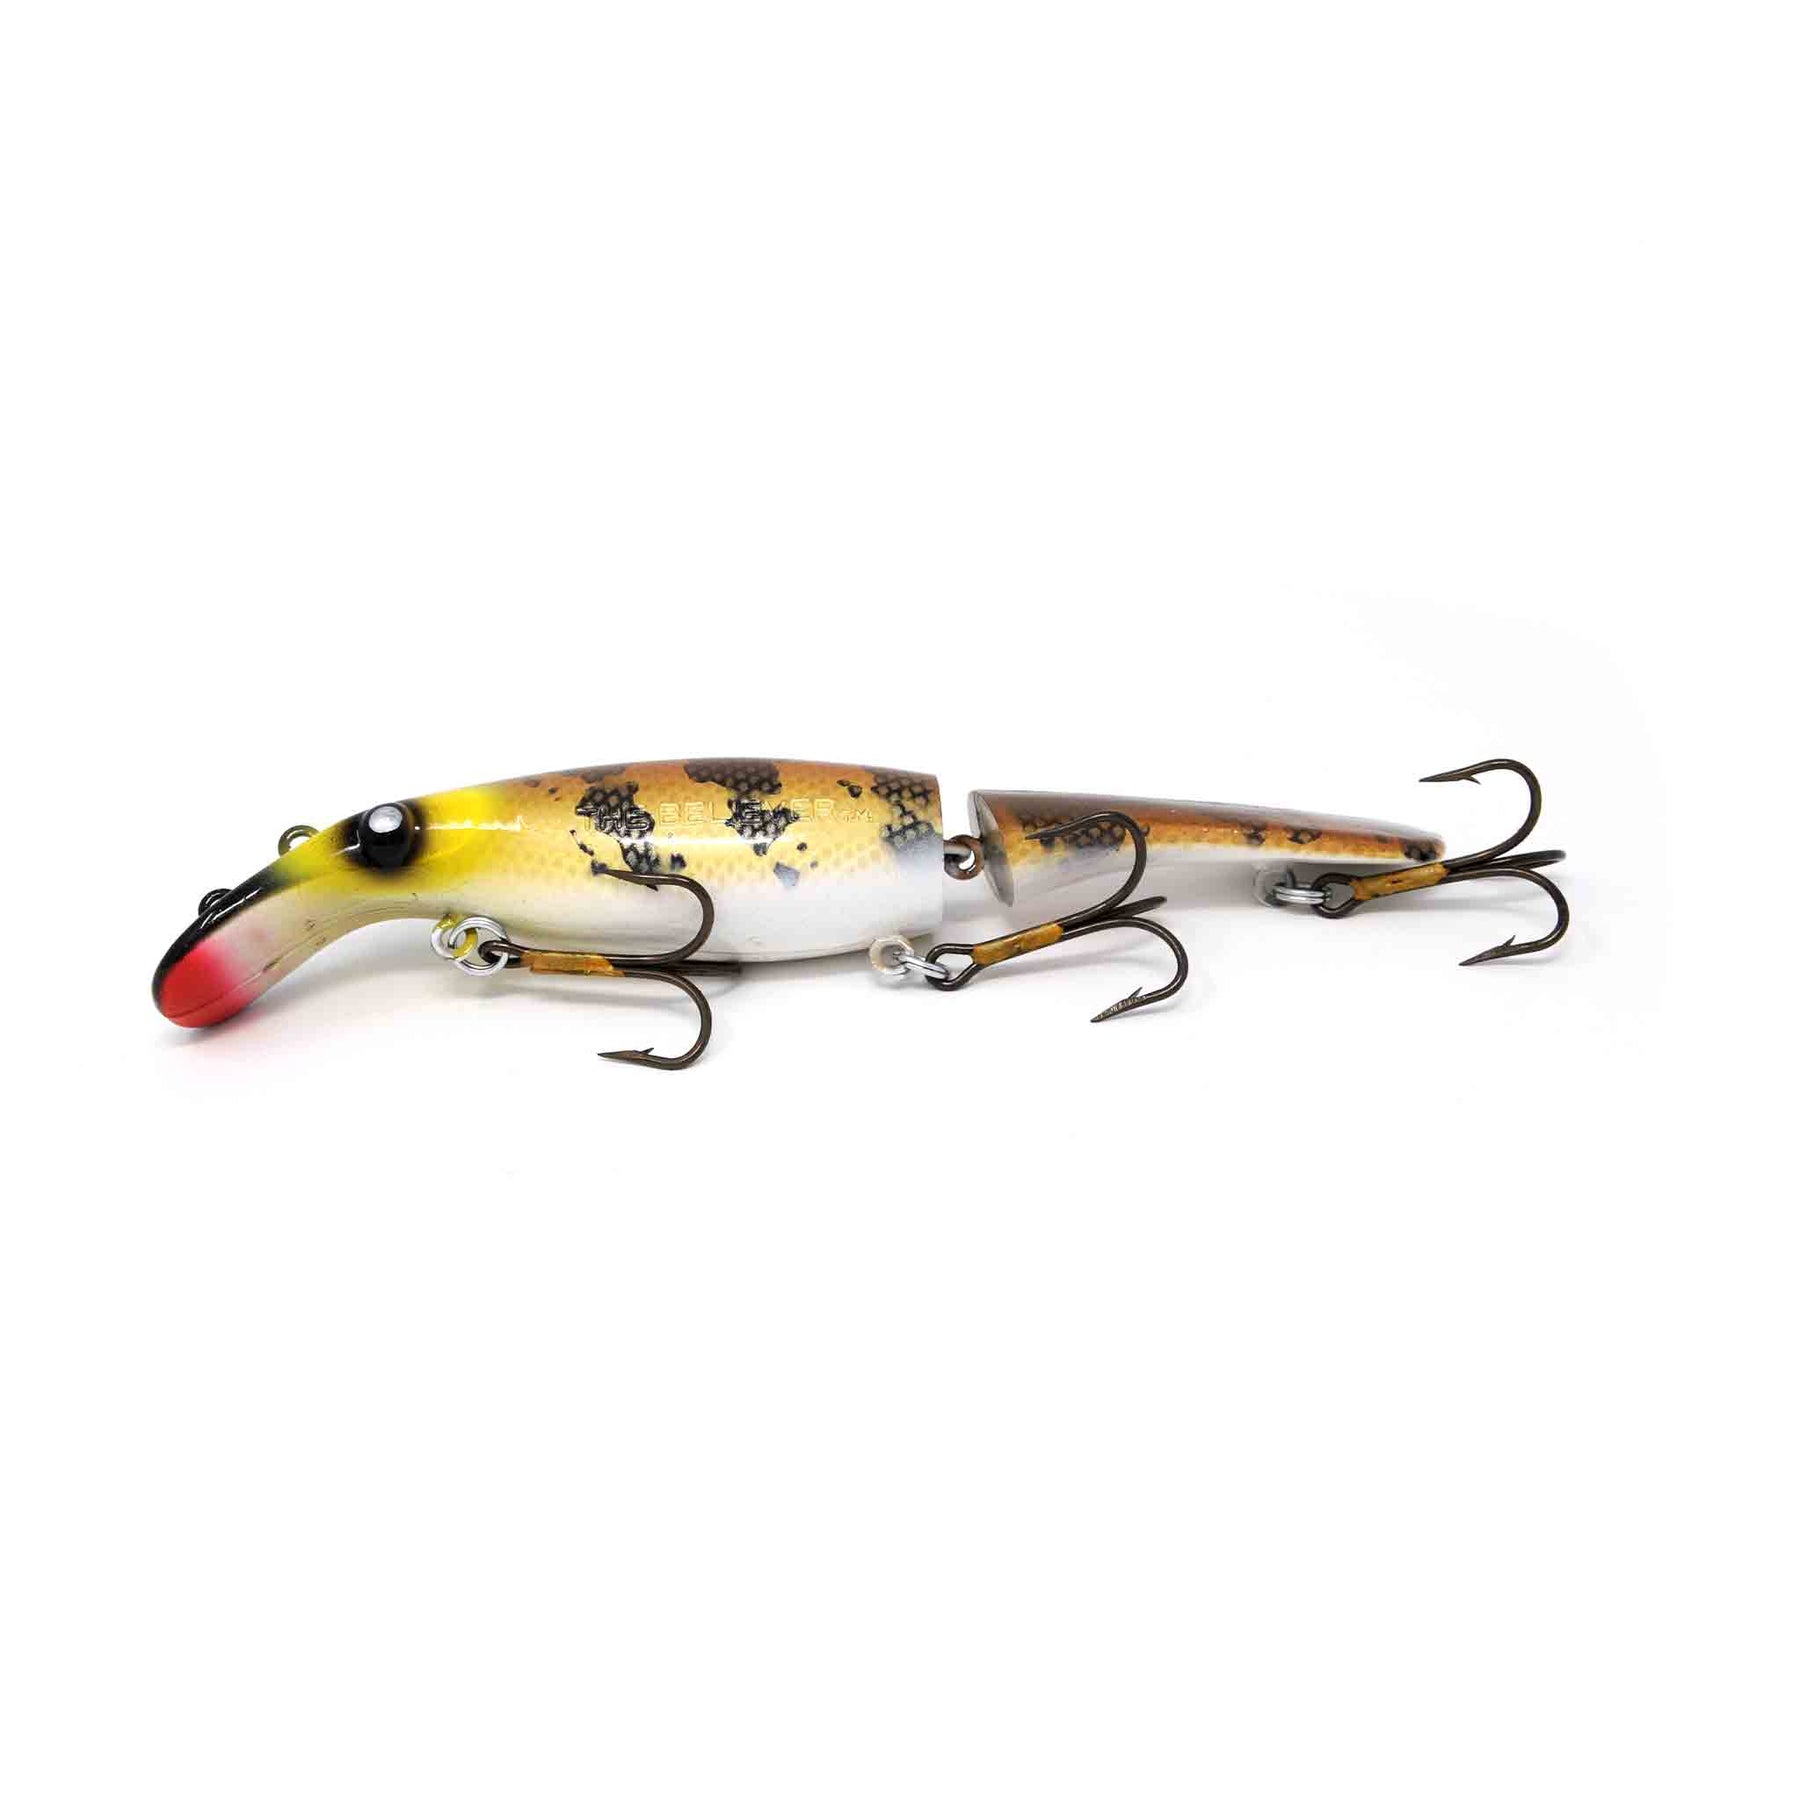 Drifter Tackle Believer Jointed 13 Crankbait | Musky Lures Perch